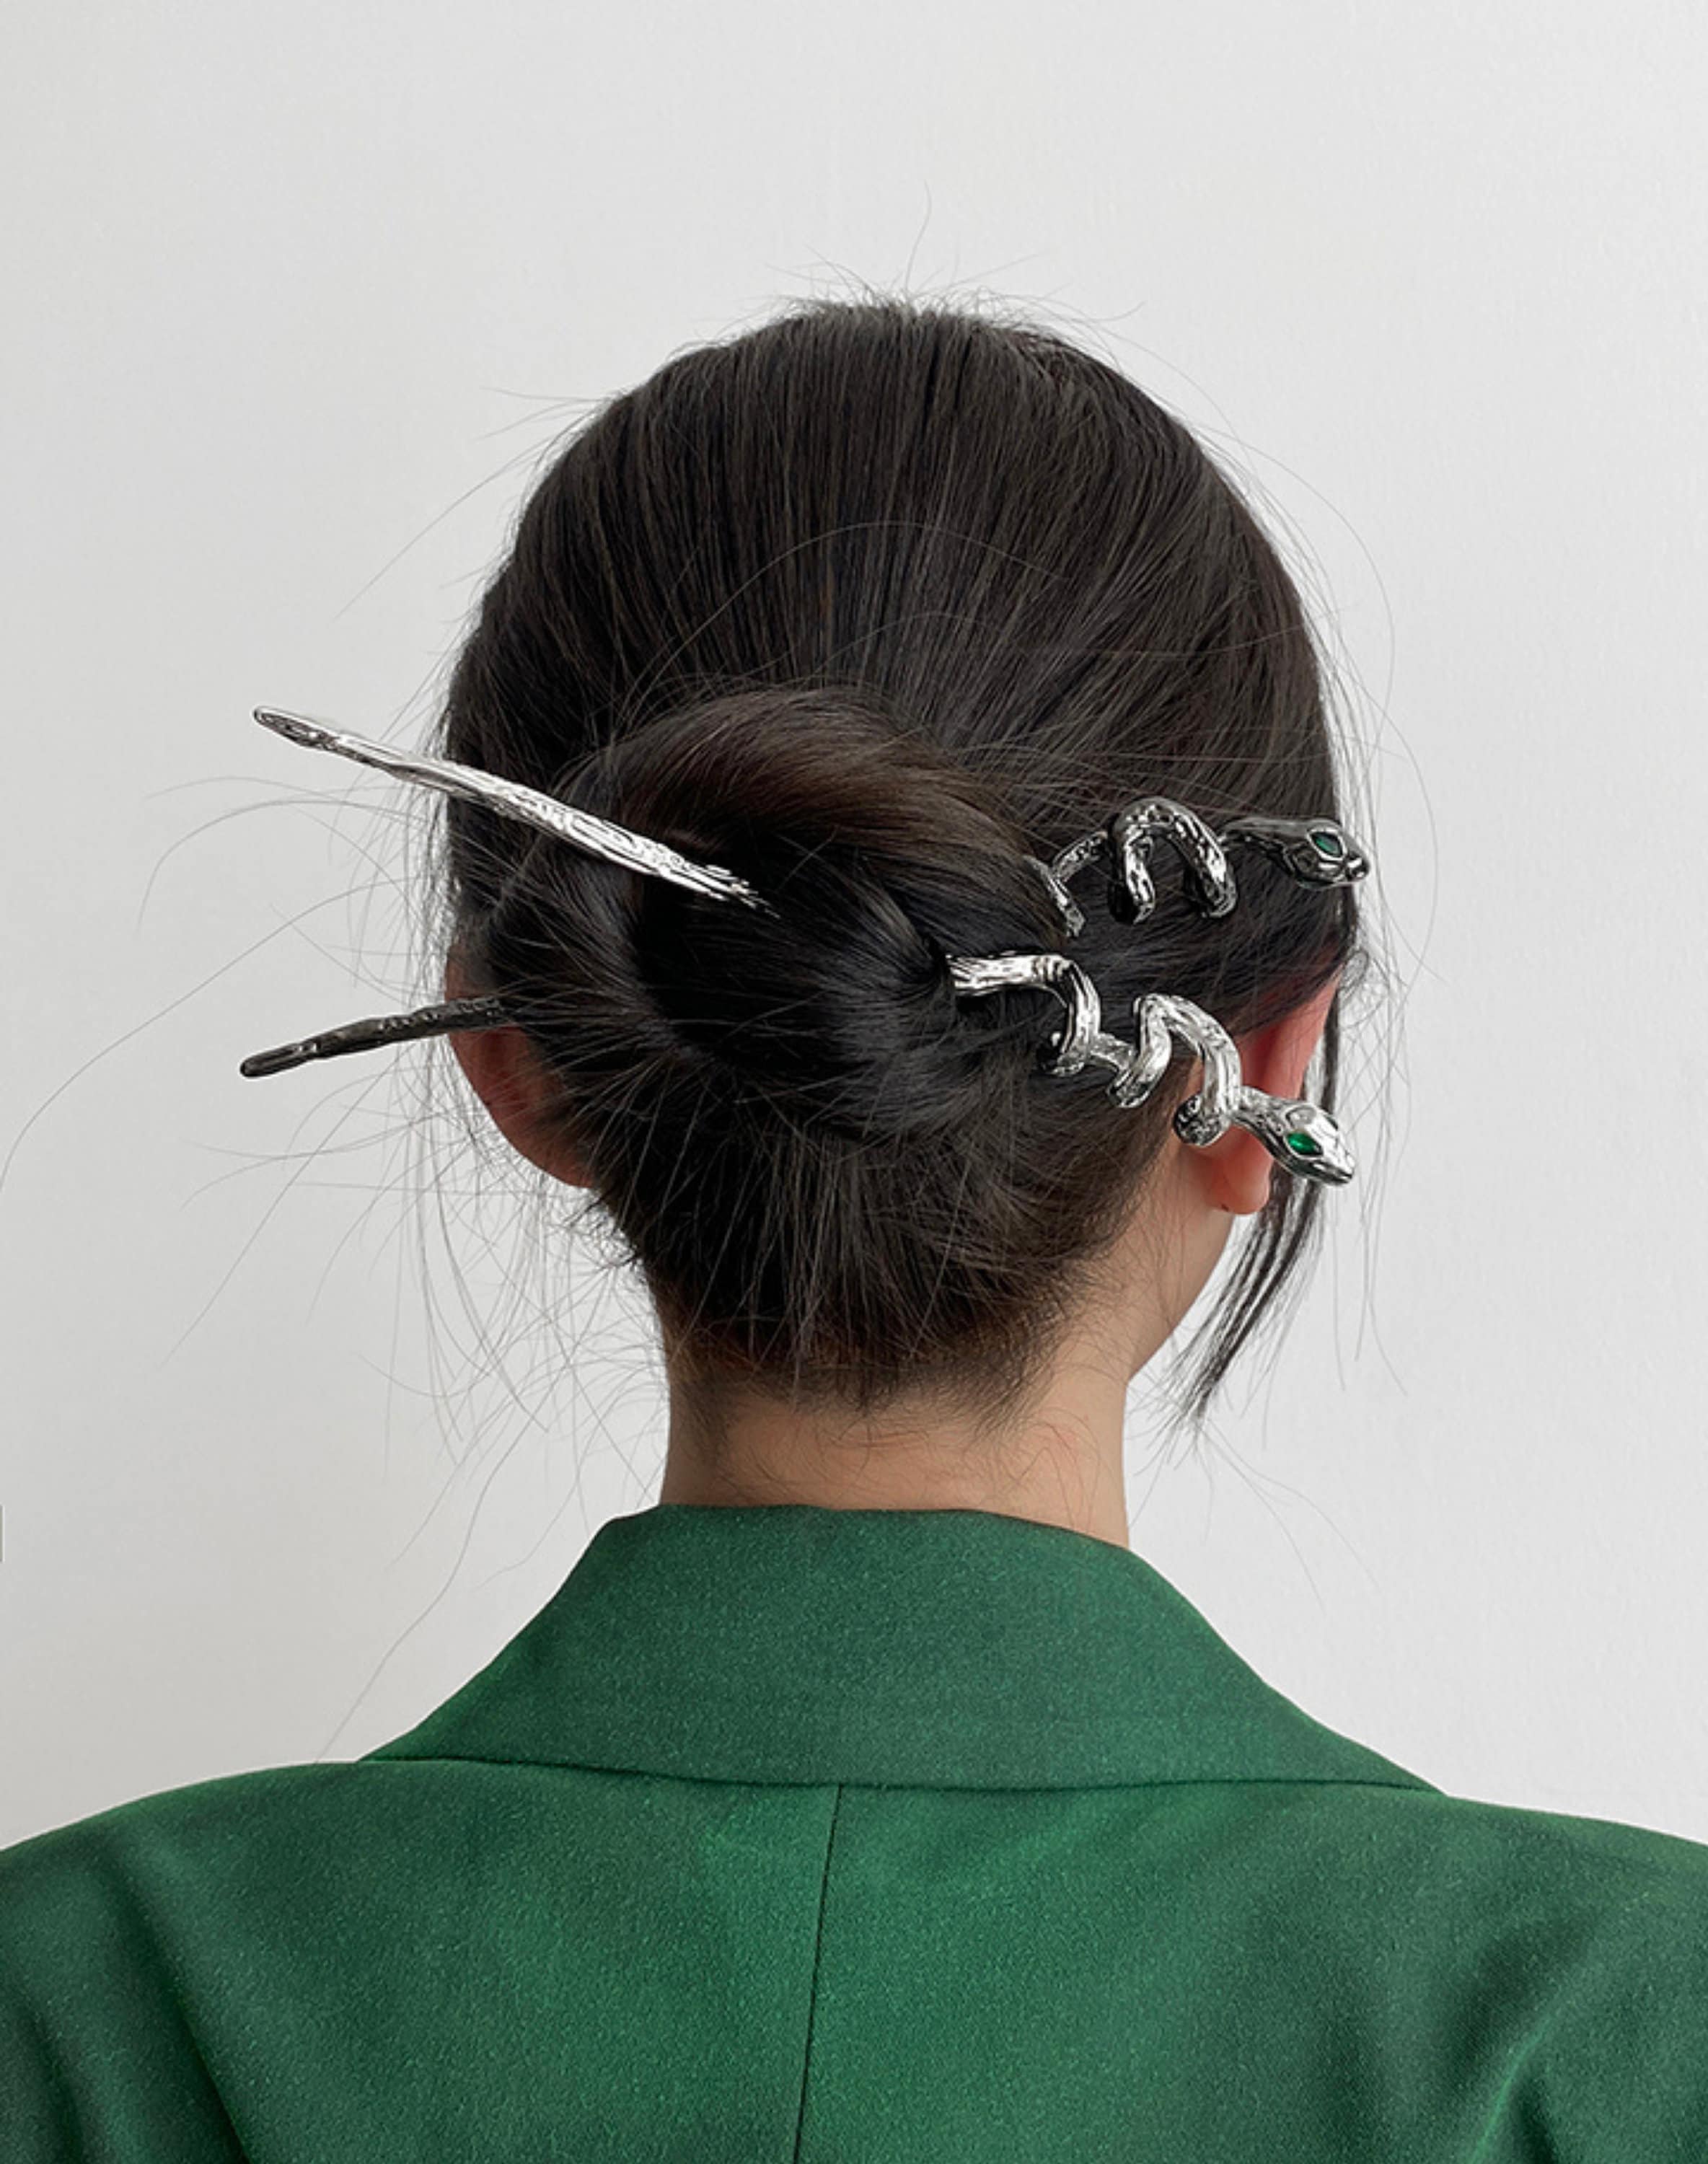 how to use hair sticks